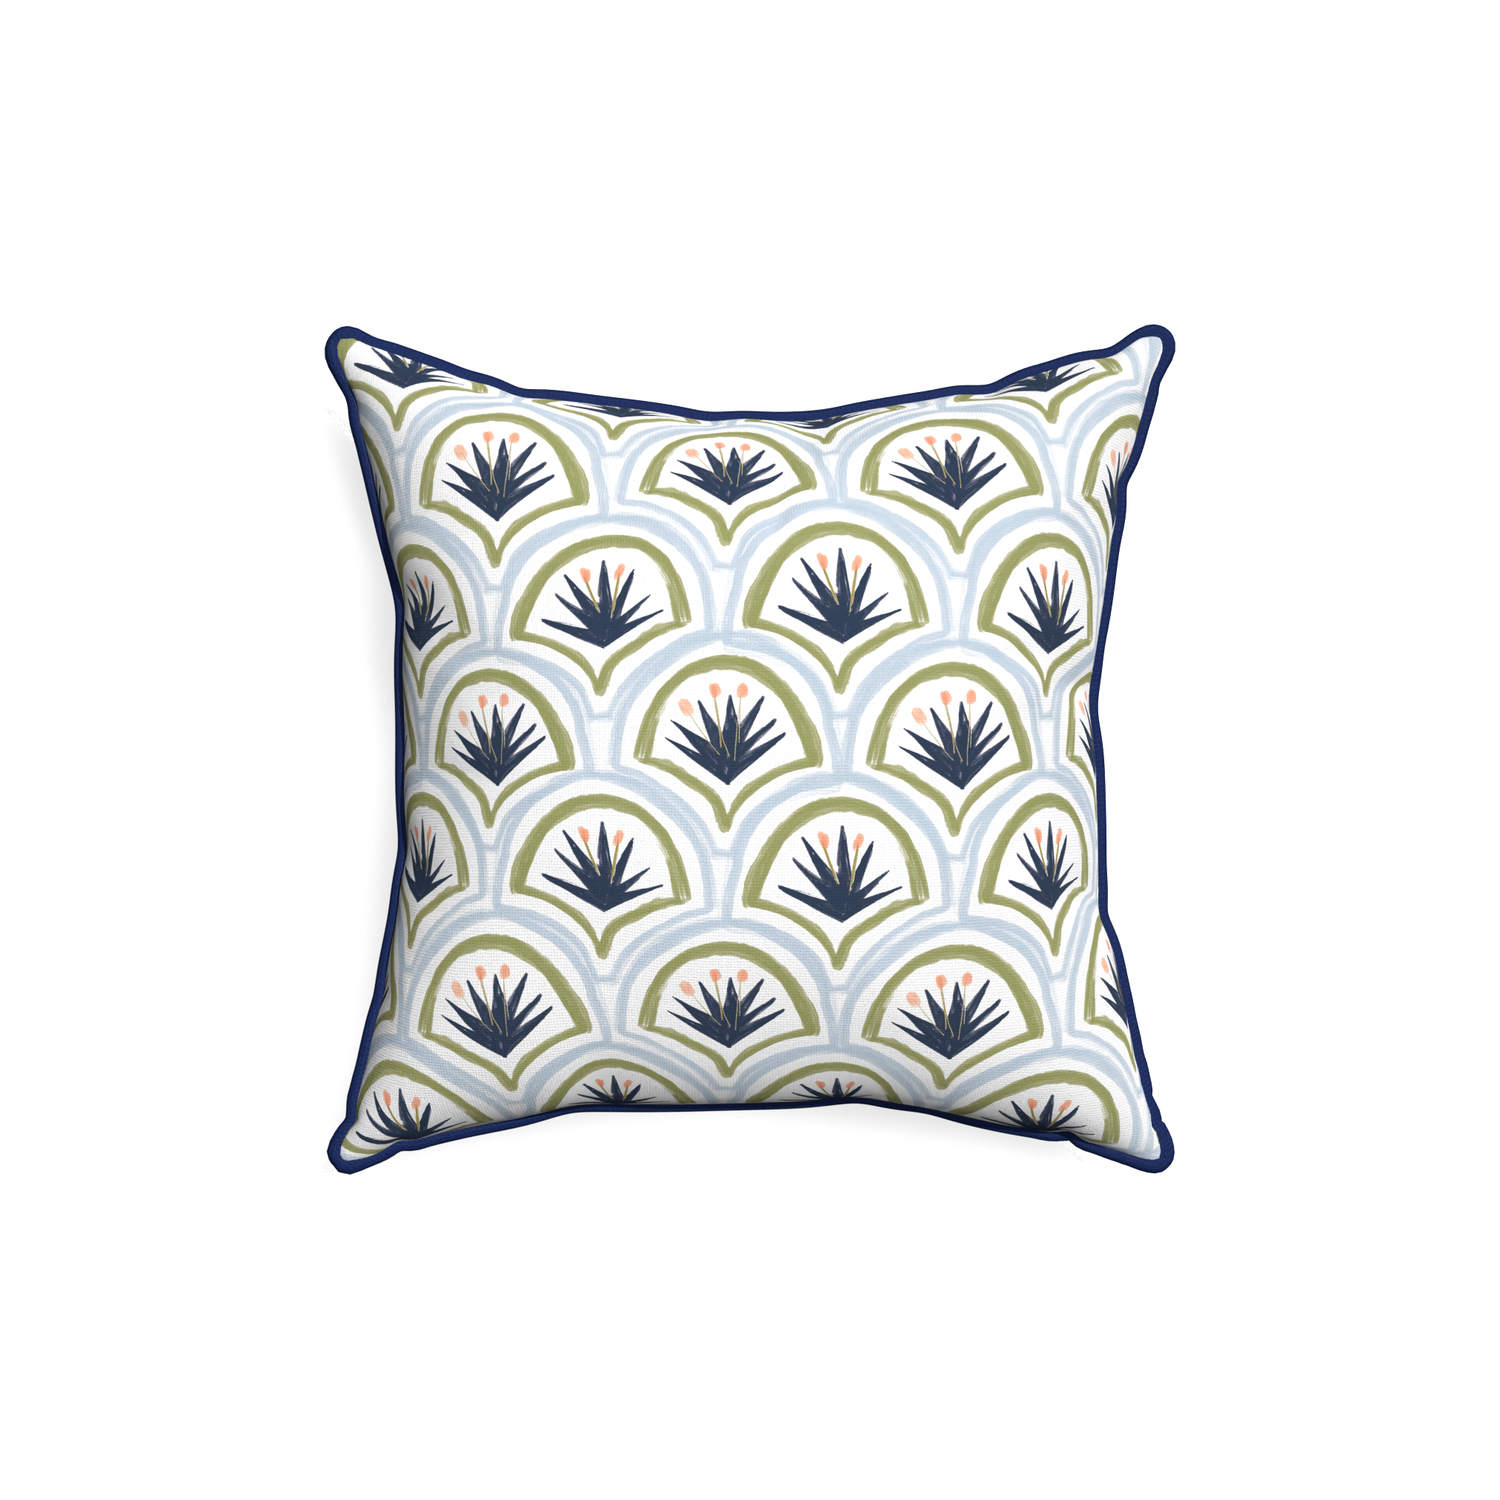 18-square thatcher midnight custom art deco palm patternpillow with midnight piping on white background